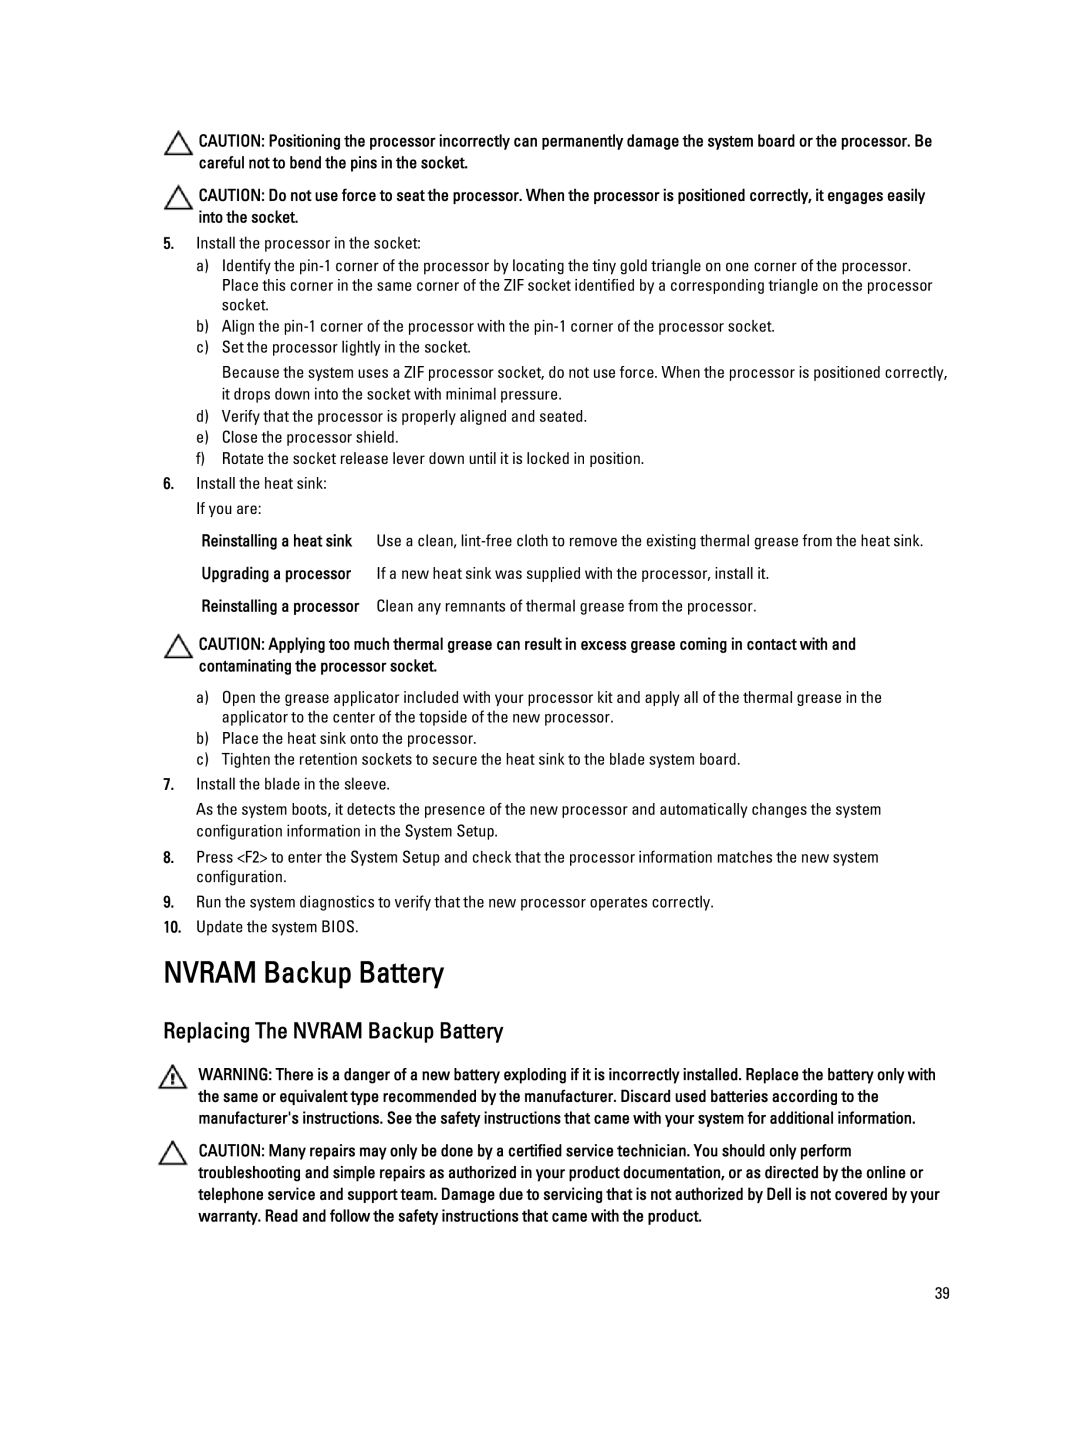 Dell QHB owner manual Replacing The Nvram Backup Battery 